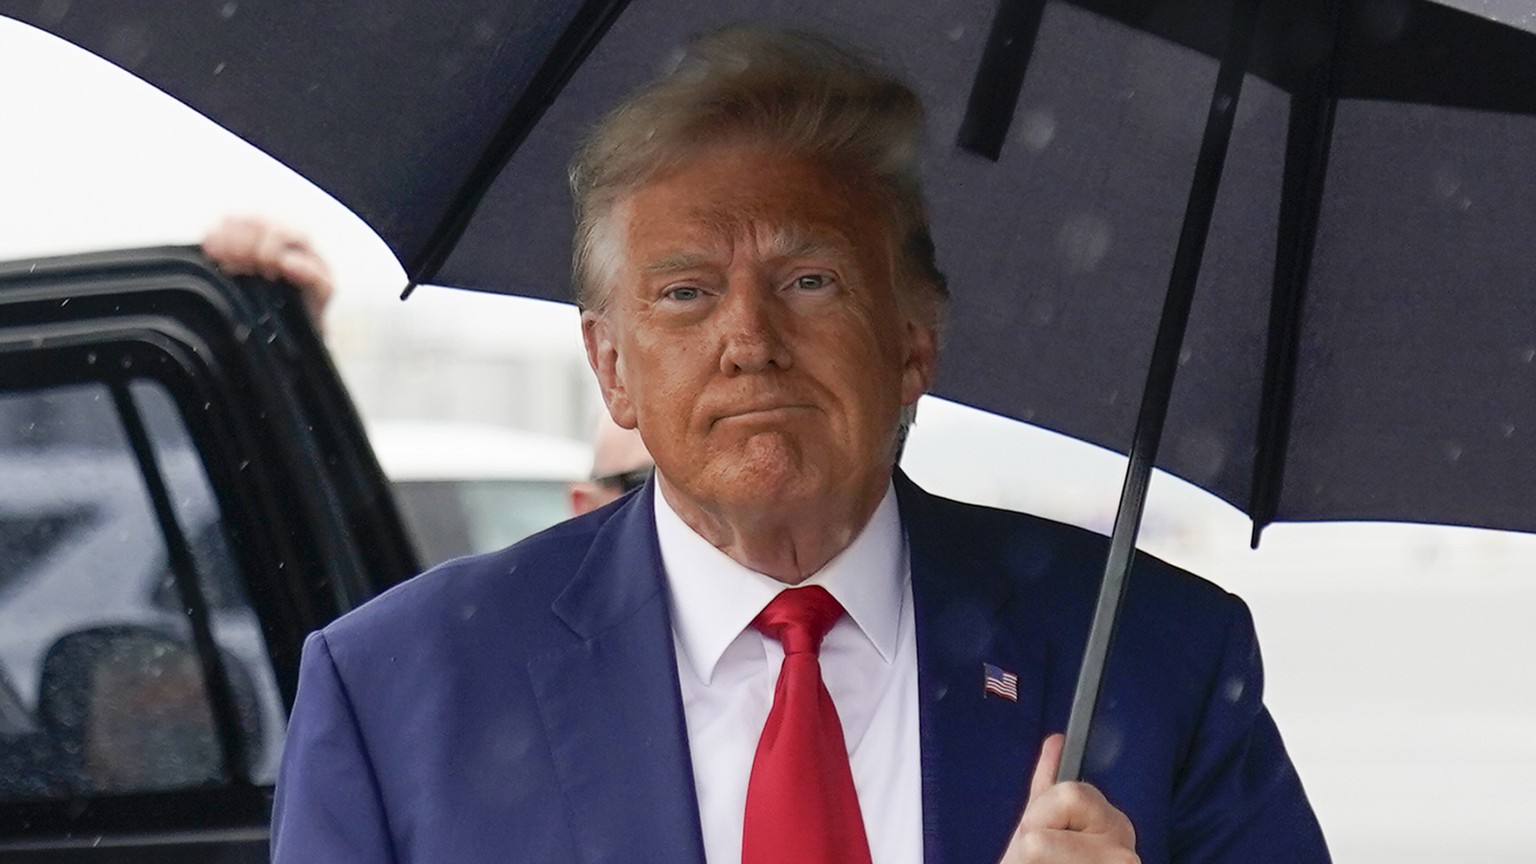 Former President Donald Trump walks to speak with reporters before he boarding his plane at Ronald Reagan Washington National Airport, Thursday, Aug. 3, 2023, in Arlington, Va., after facing a judge o ...